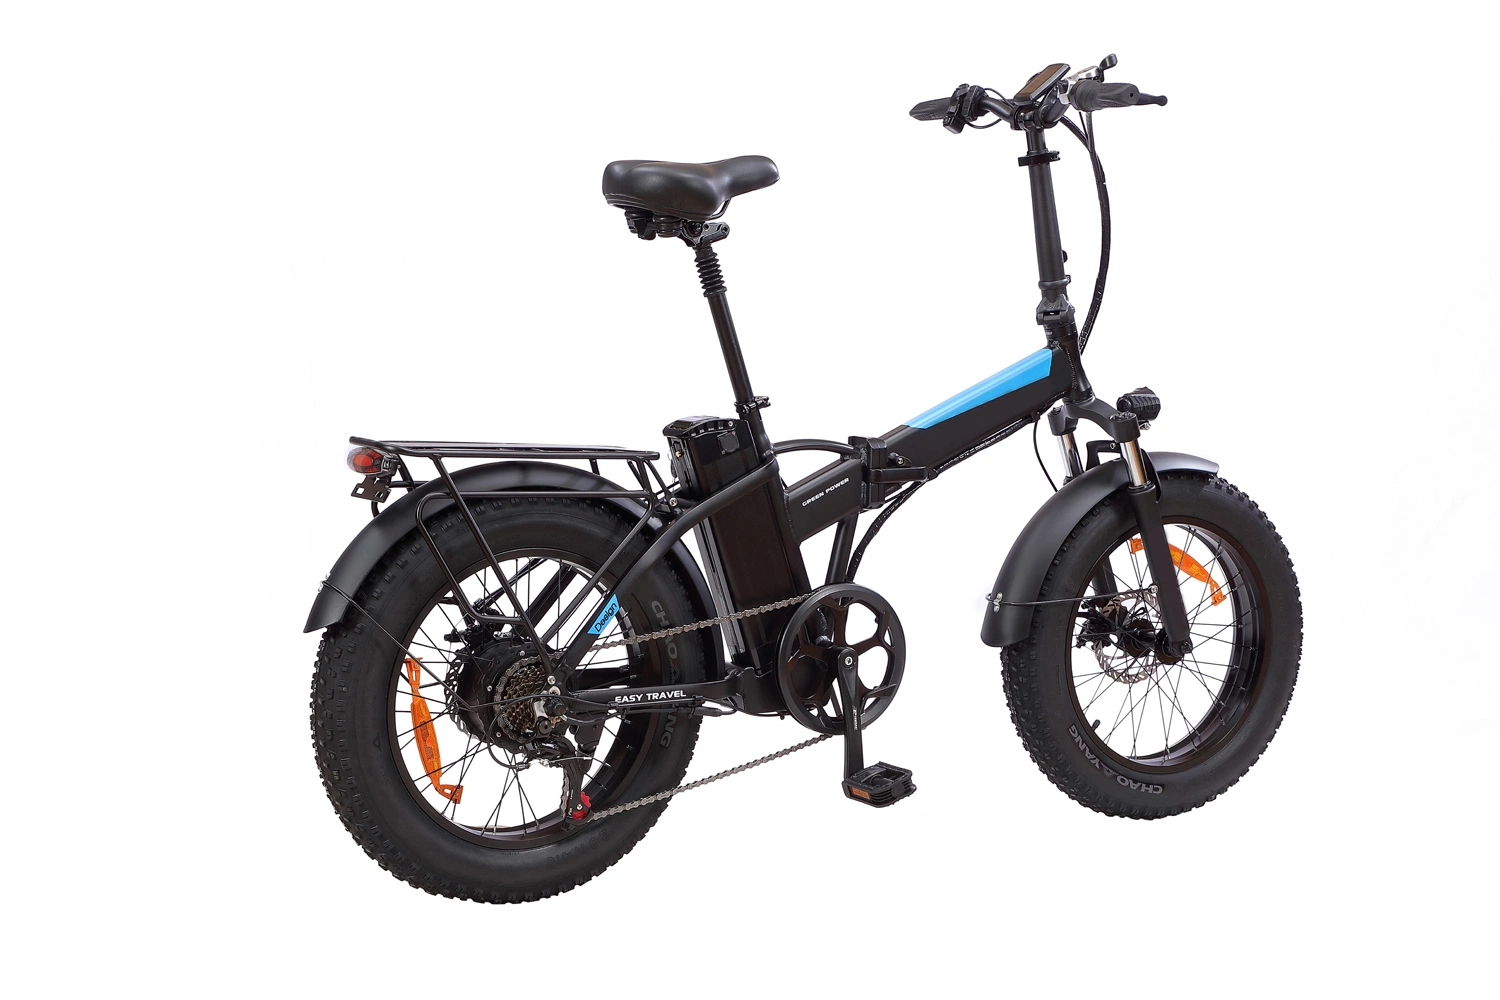 Ebike Manufacturer Foldable Bicycle 500W Motor Electric Bike Fat Tire E Bicycle